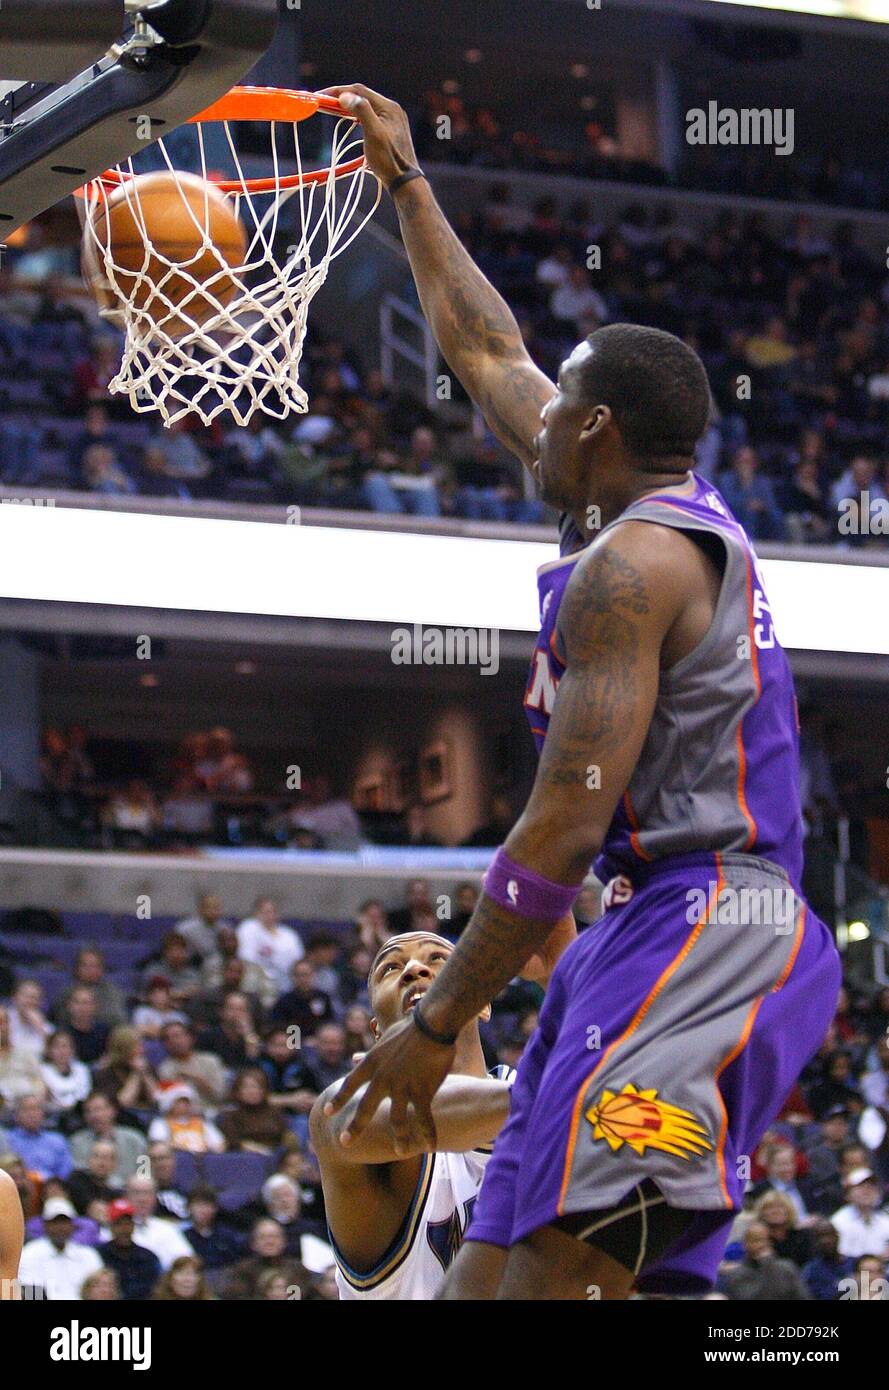 NO FILM, NO VIDEO, NO TV, NO DOCUMENTARY - Phoenix Suns Amare Stoudemire (1) slam dunks over Washington Wizards Caron Butler (3) during their game played at the Verizon Center in Washington, DC, USA on December 7, 2007. Phoenix Suns won 122-107. Photo by Harry E. Walker/MCT/ABACAPRESS.COM Stock Photo